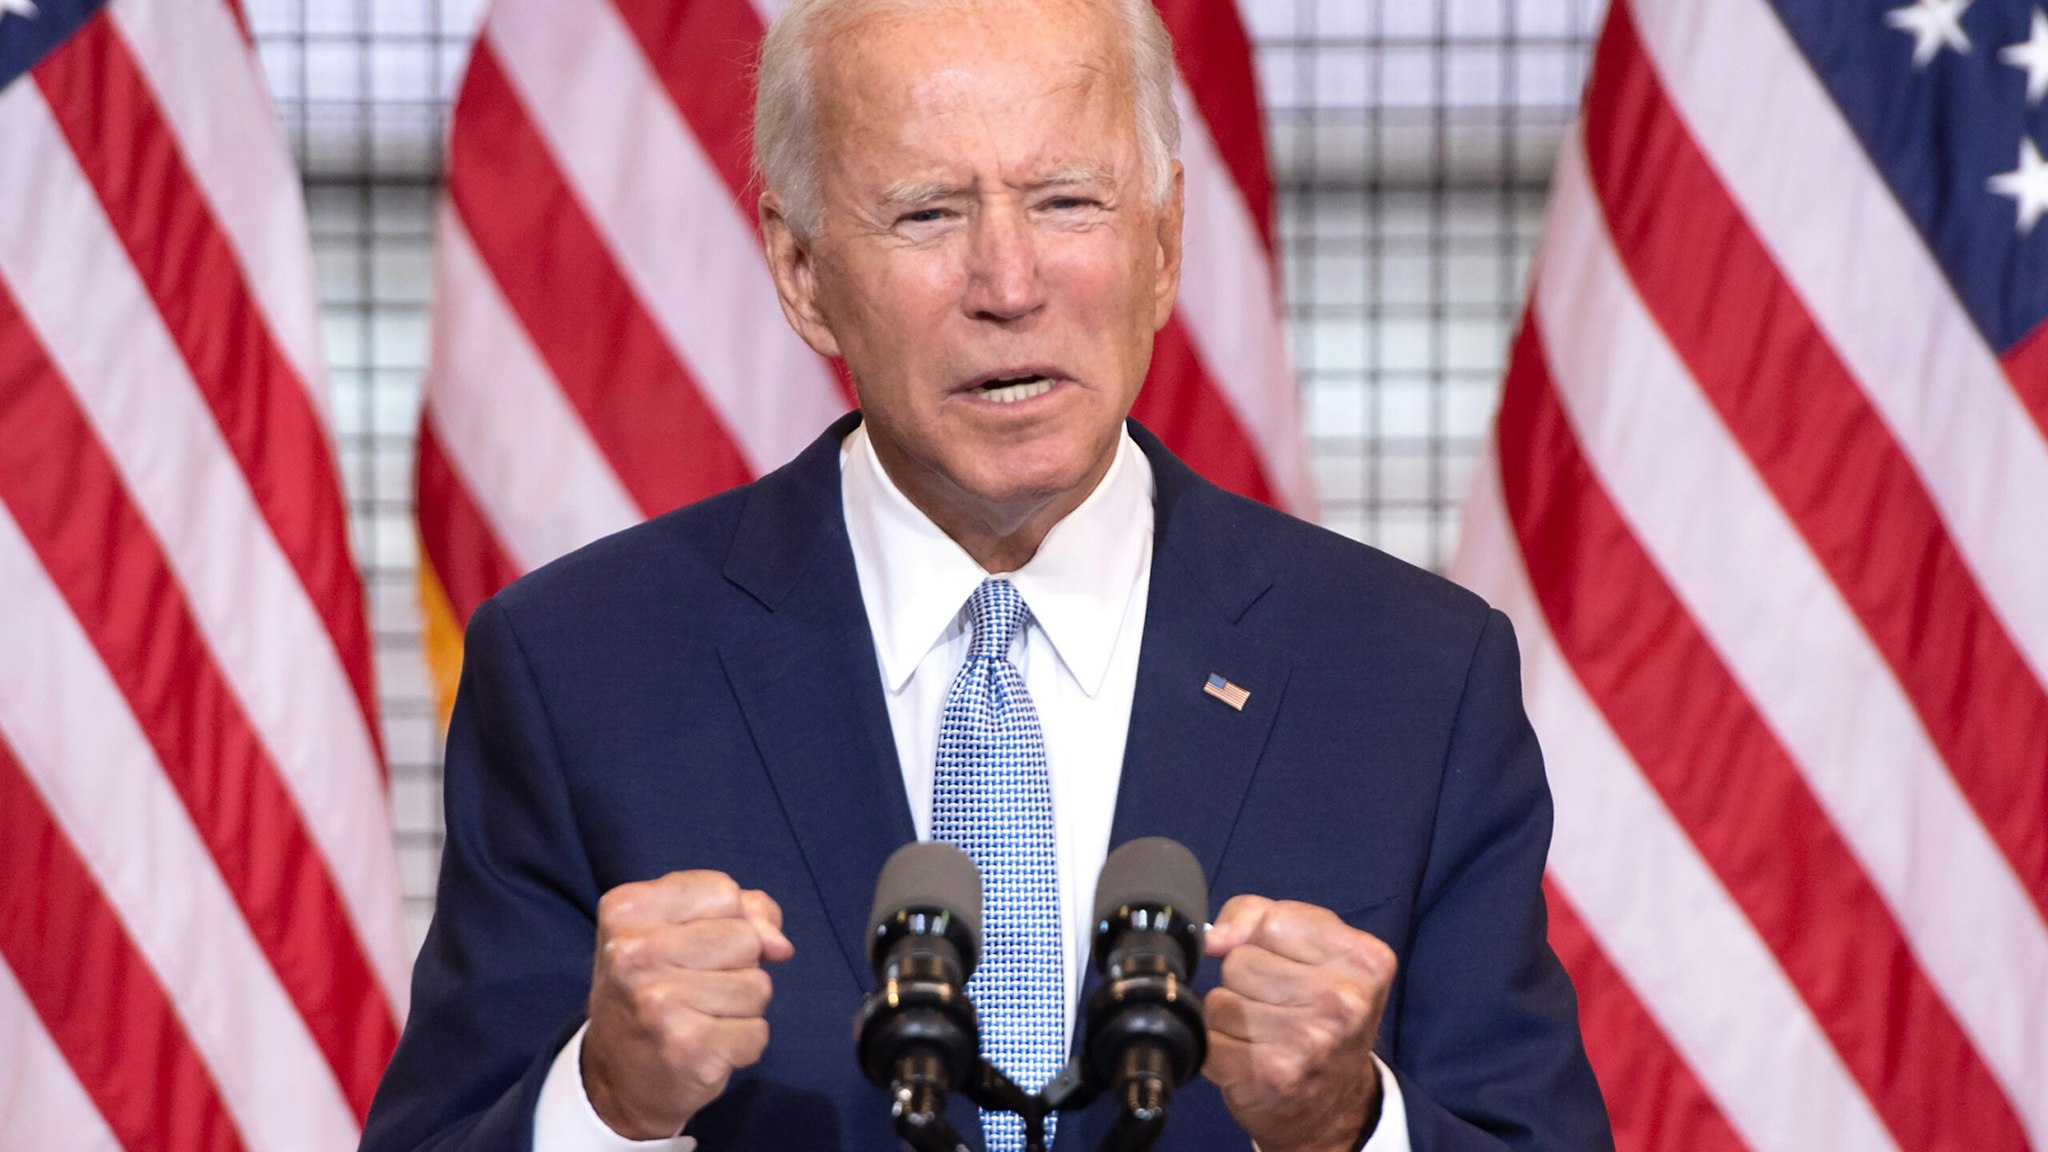 TOPSHOT - Democratic presidential nominee former US Vice President Joe Biden speaks during a campaign event at Mill 19 in Pittsburgh, Pennsylvania, August 31, 2020.